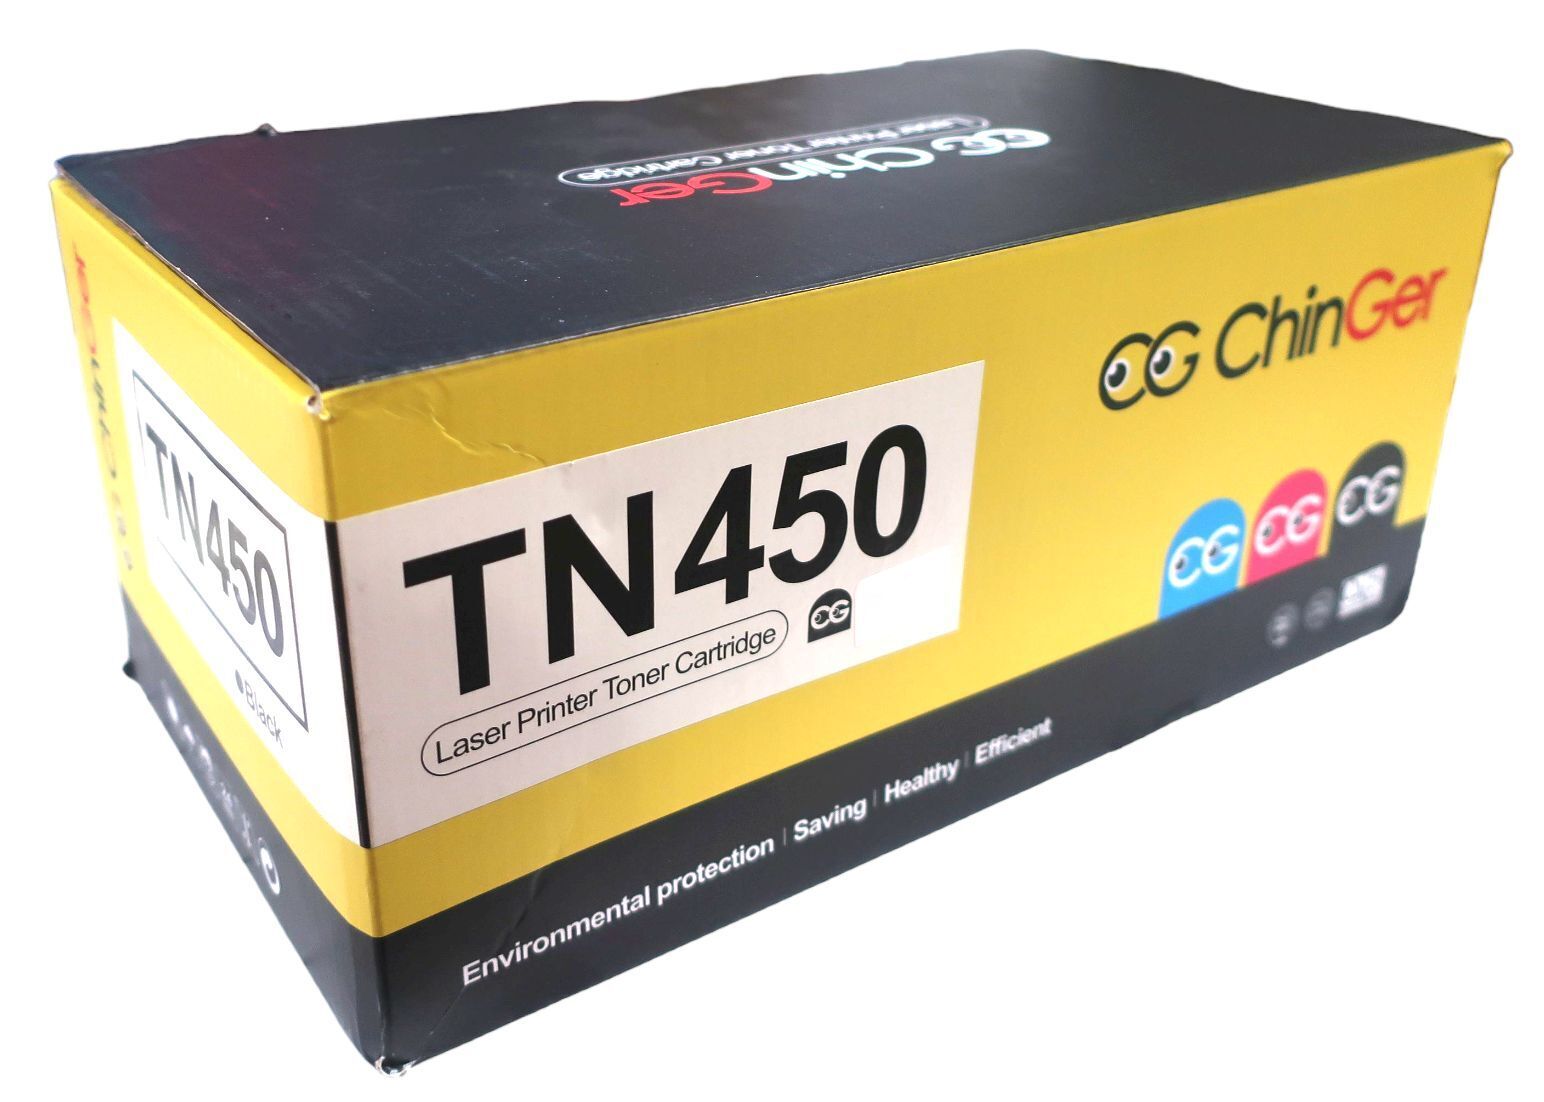 Brother Compatible TN-450 Toner Cartridge - New Sealed Package in an Open Box